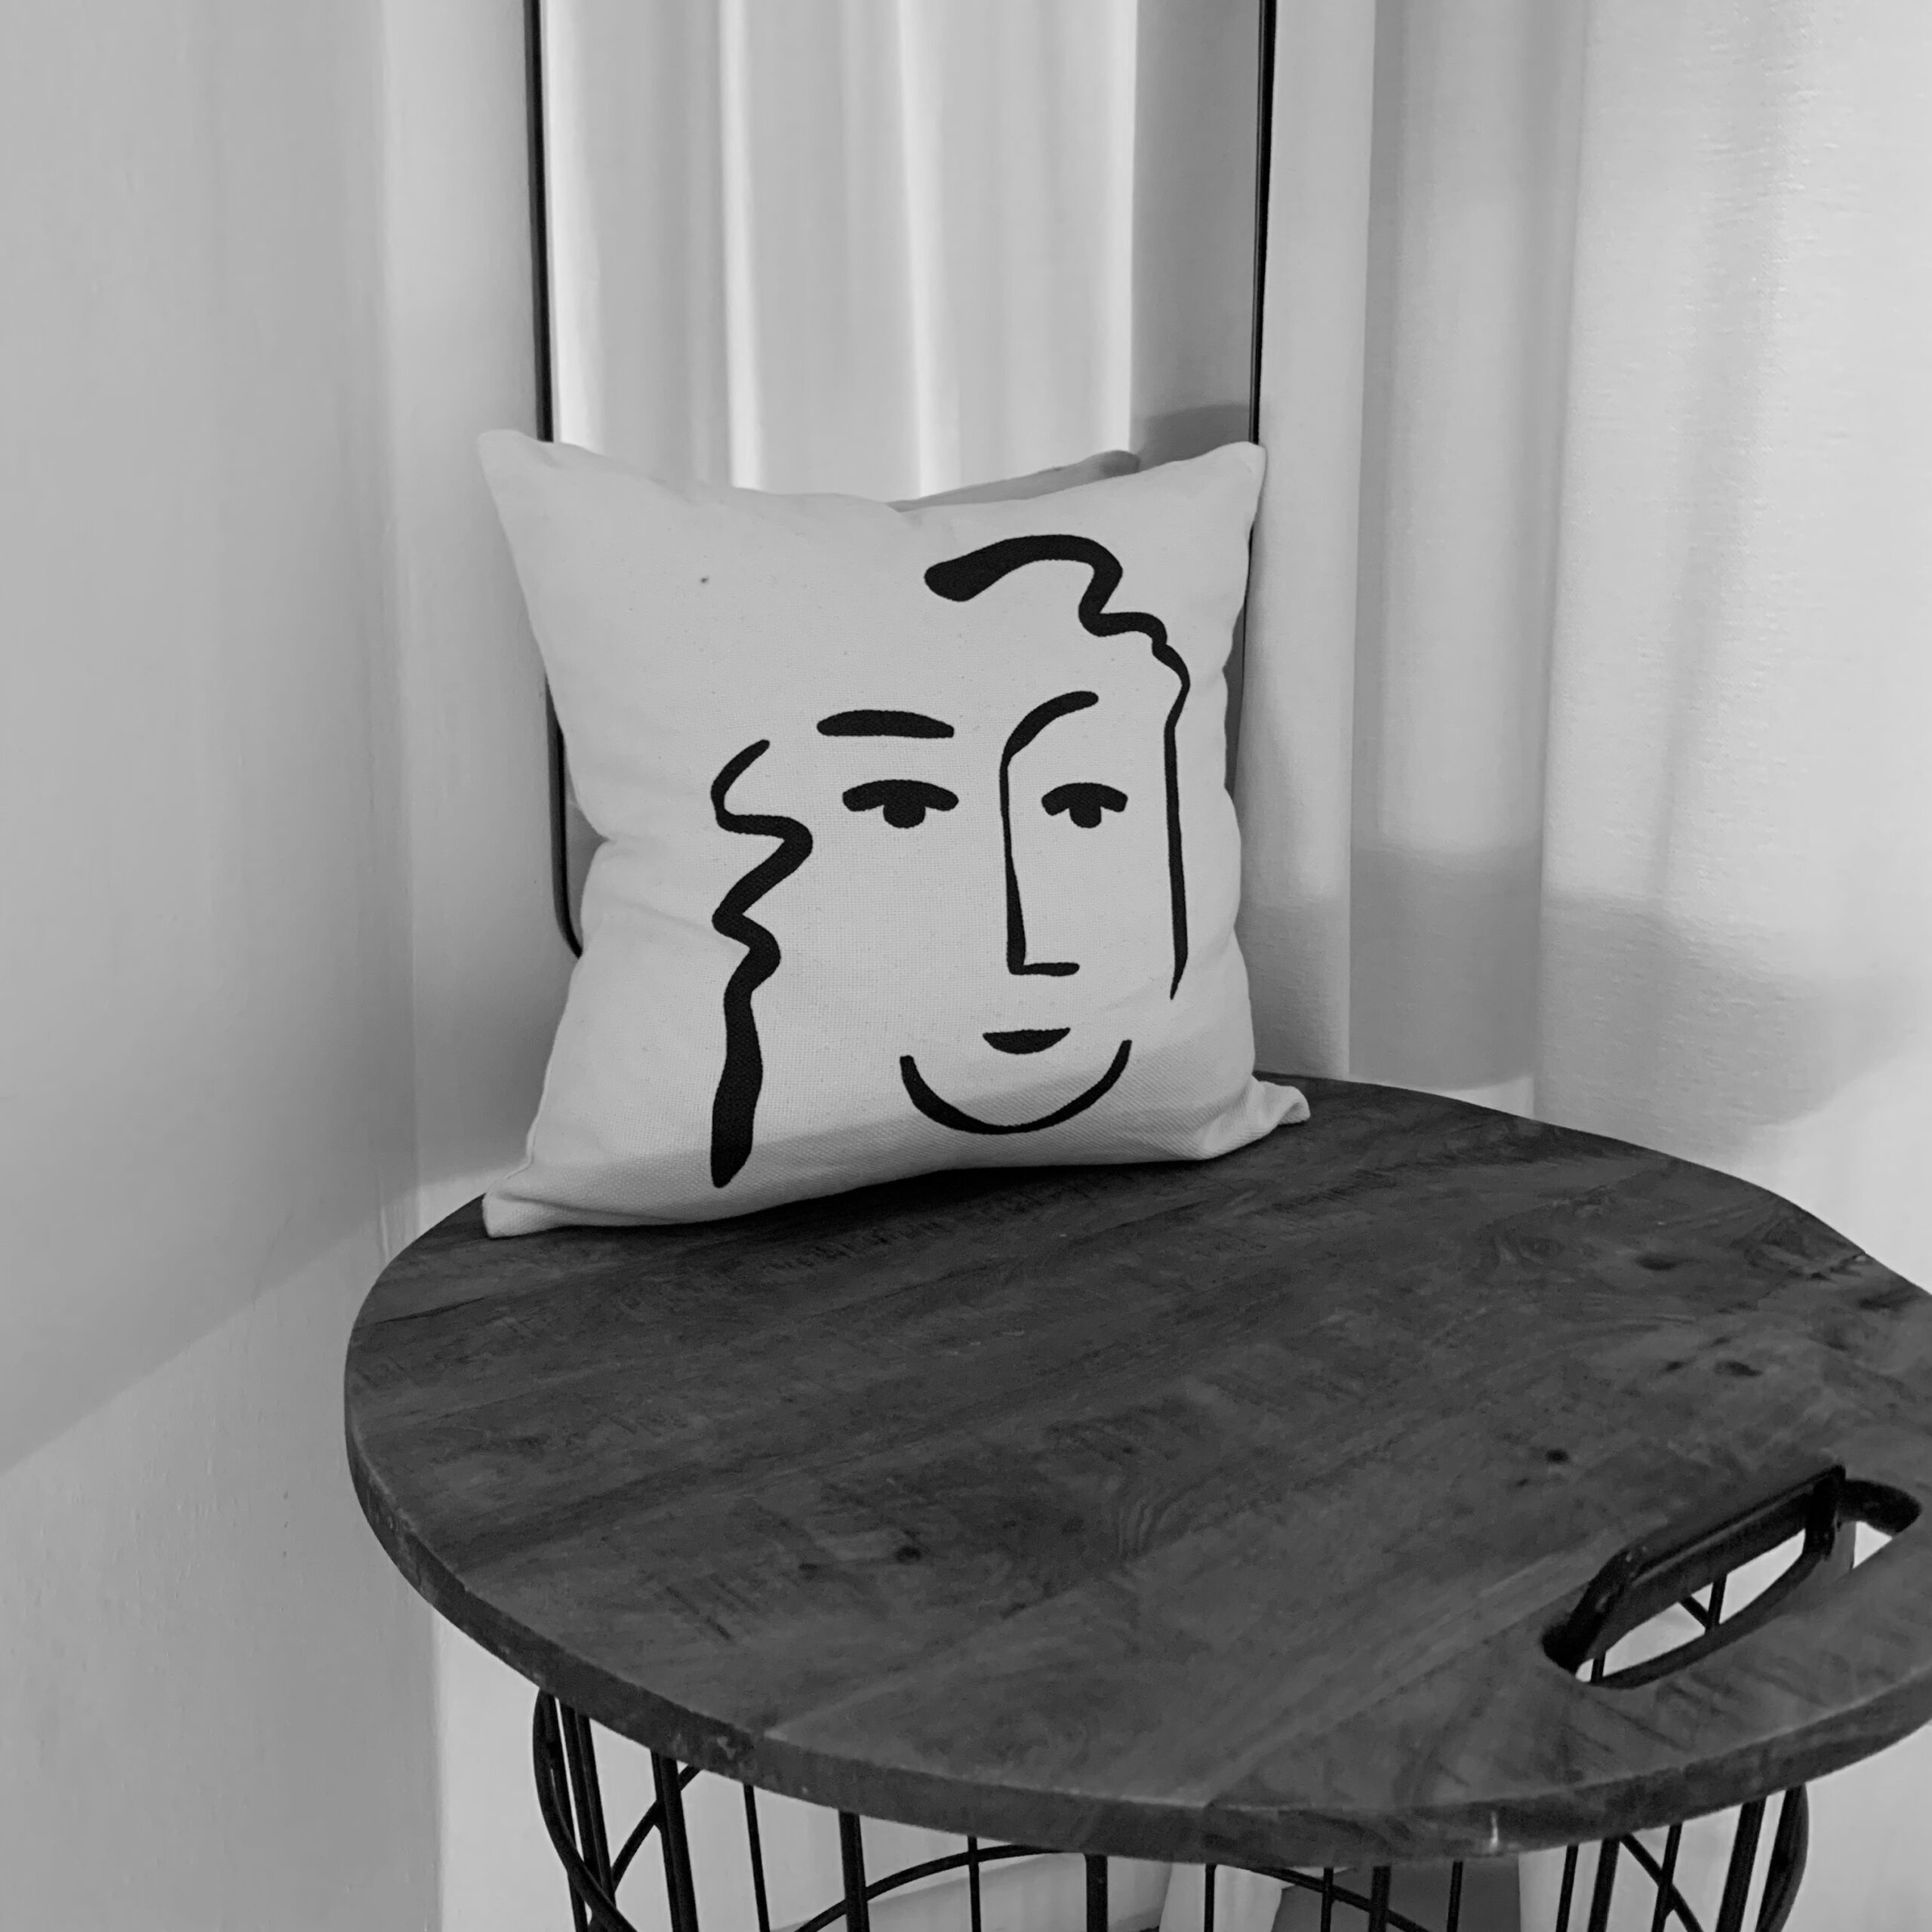 Cushion in the changing room of a Pilates studio with a face as an illustration on it.